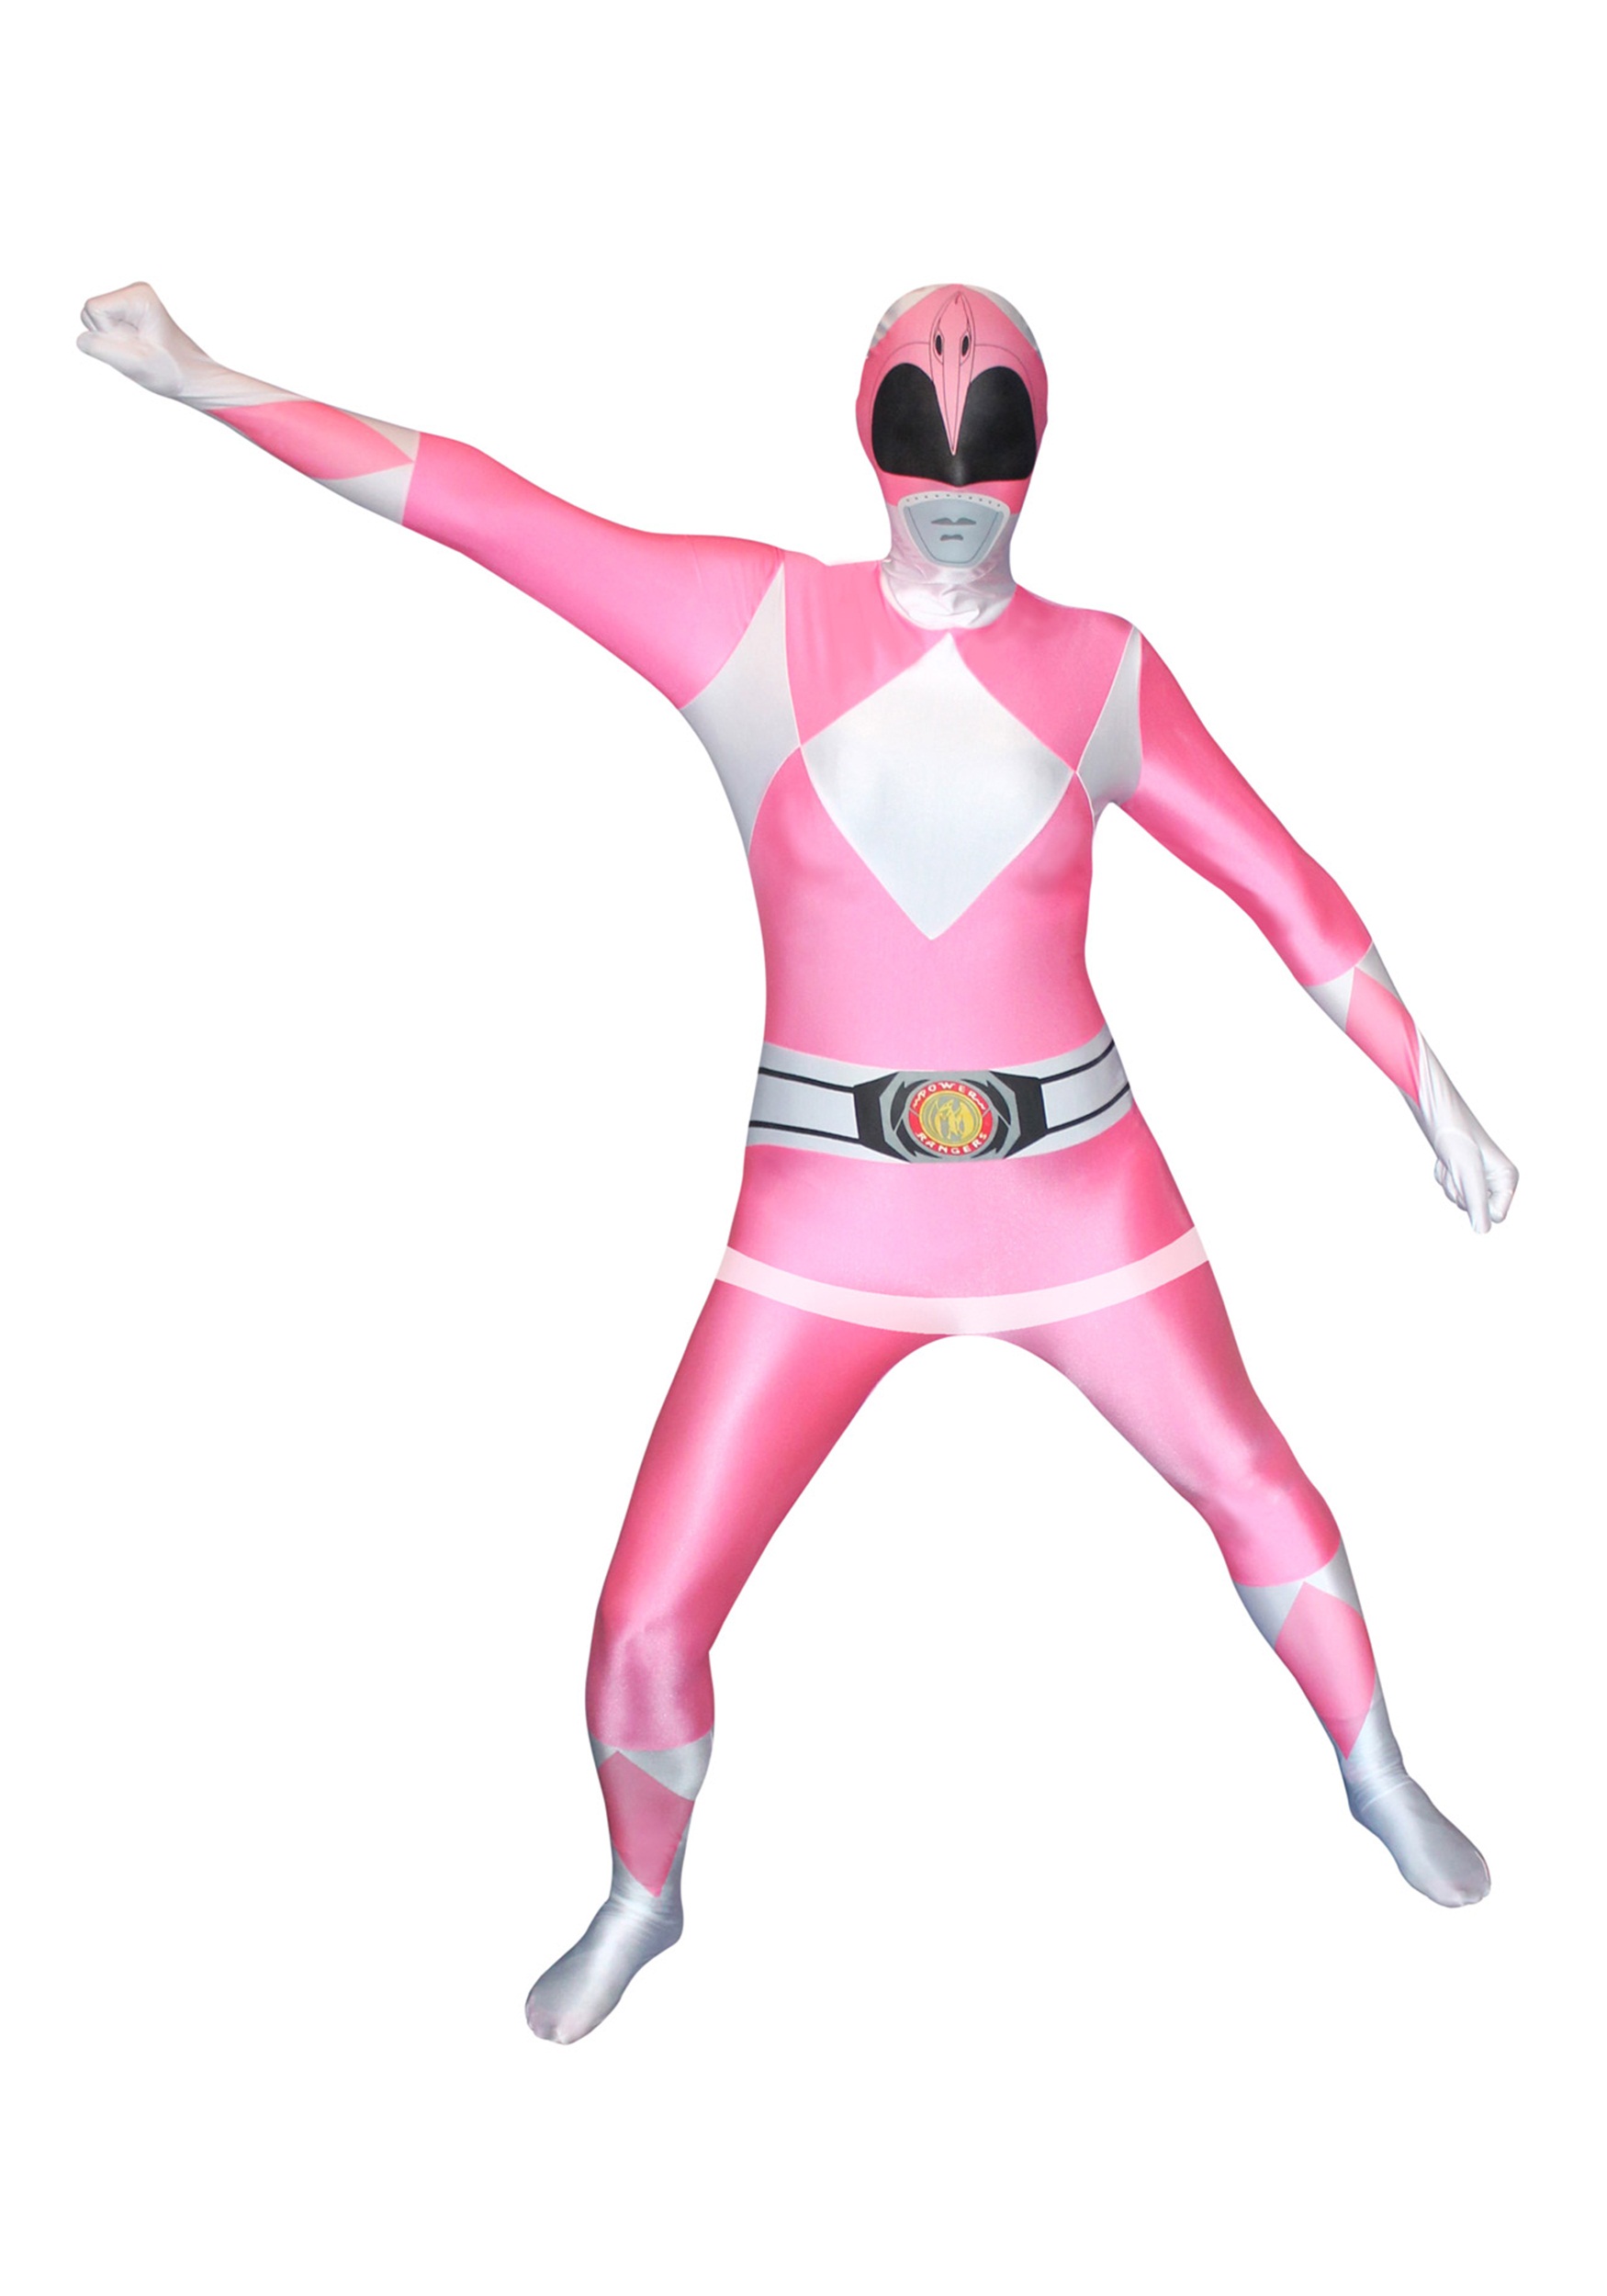 Photos - Fancy Dress Power Morphsuits  Rangers: Pink Ranger Morphsuit Costume Pink/White 